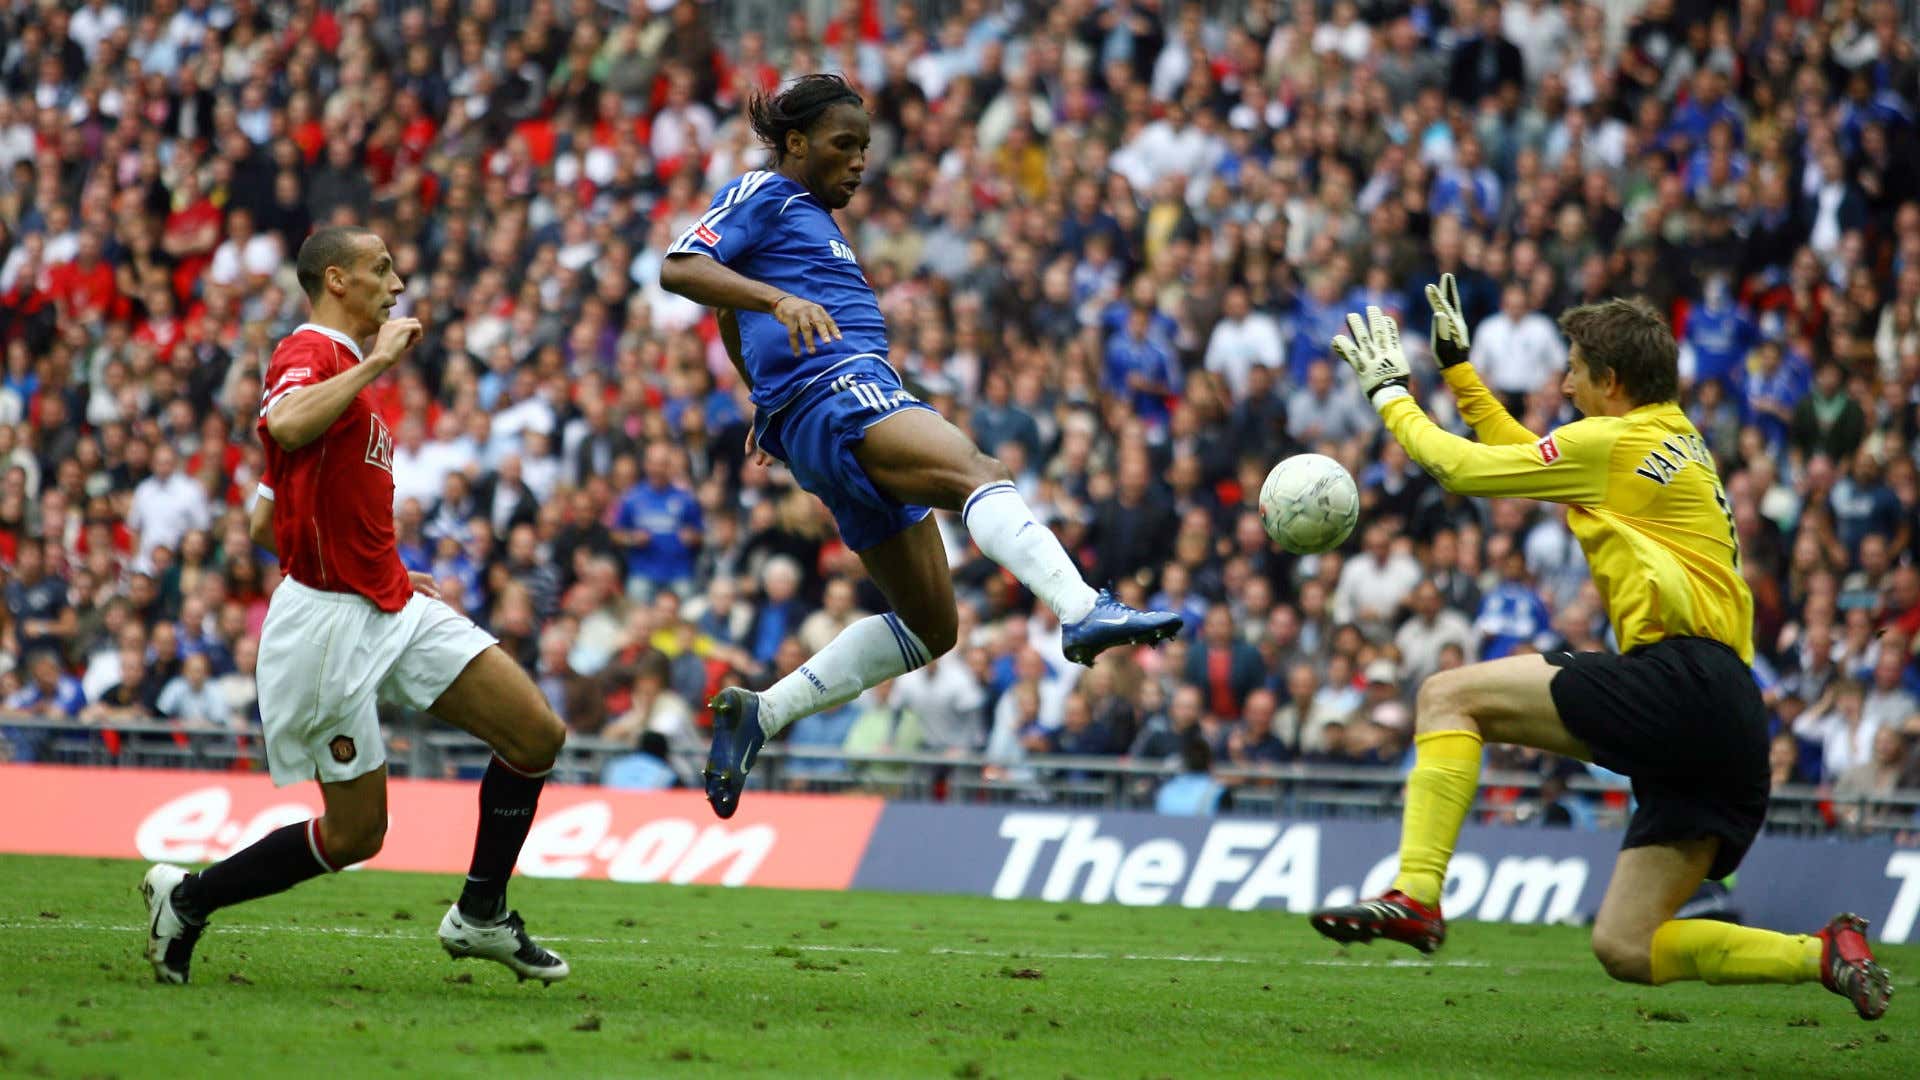 Manchester United Chelsea FA Cup 2007 Didier Drogba